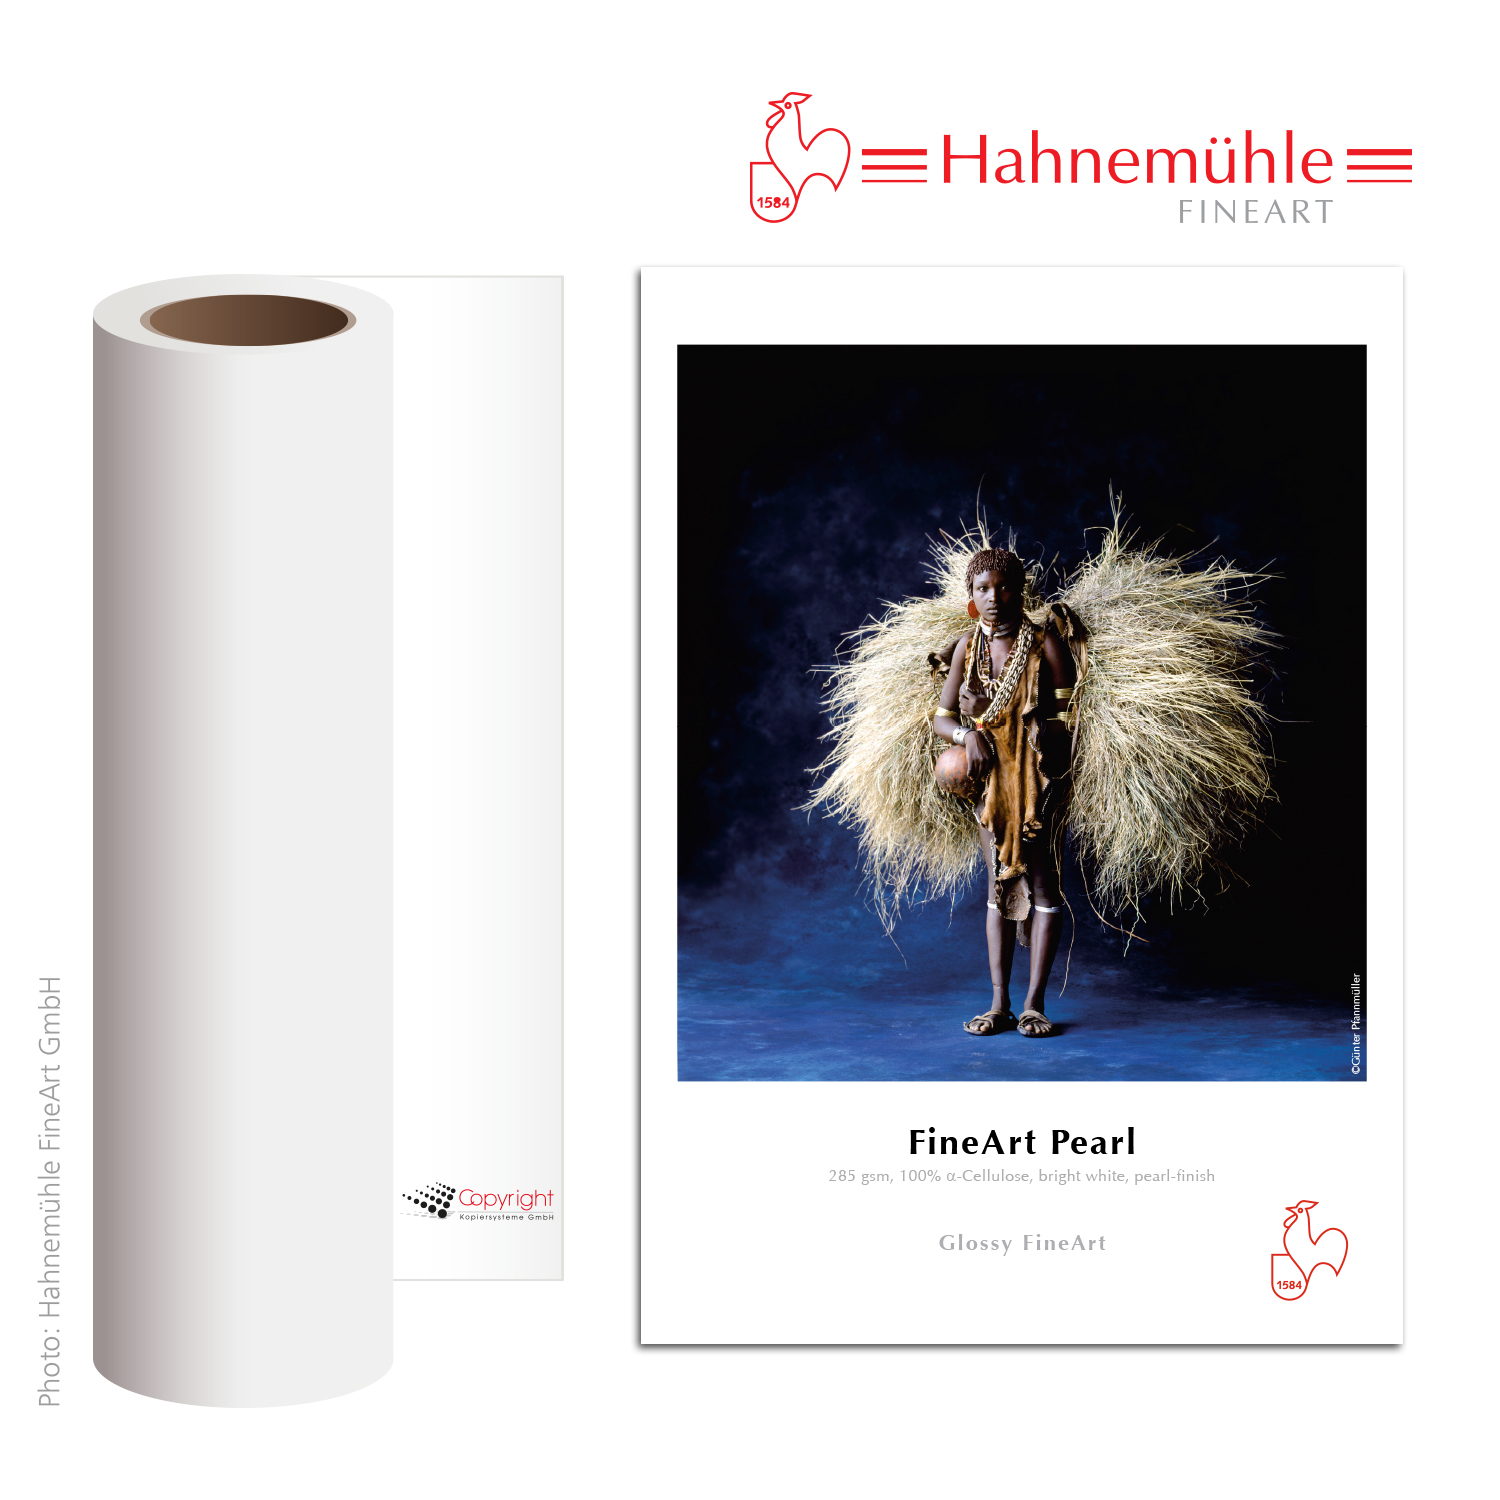 Hahnemühle FineArt Pearl